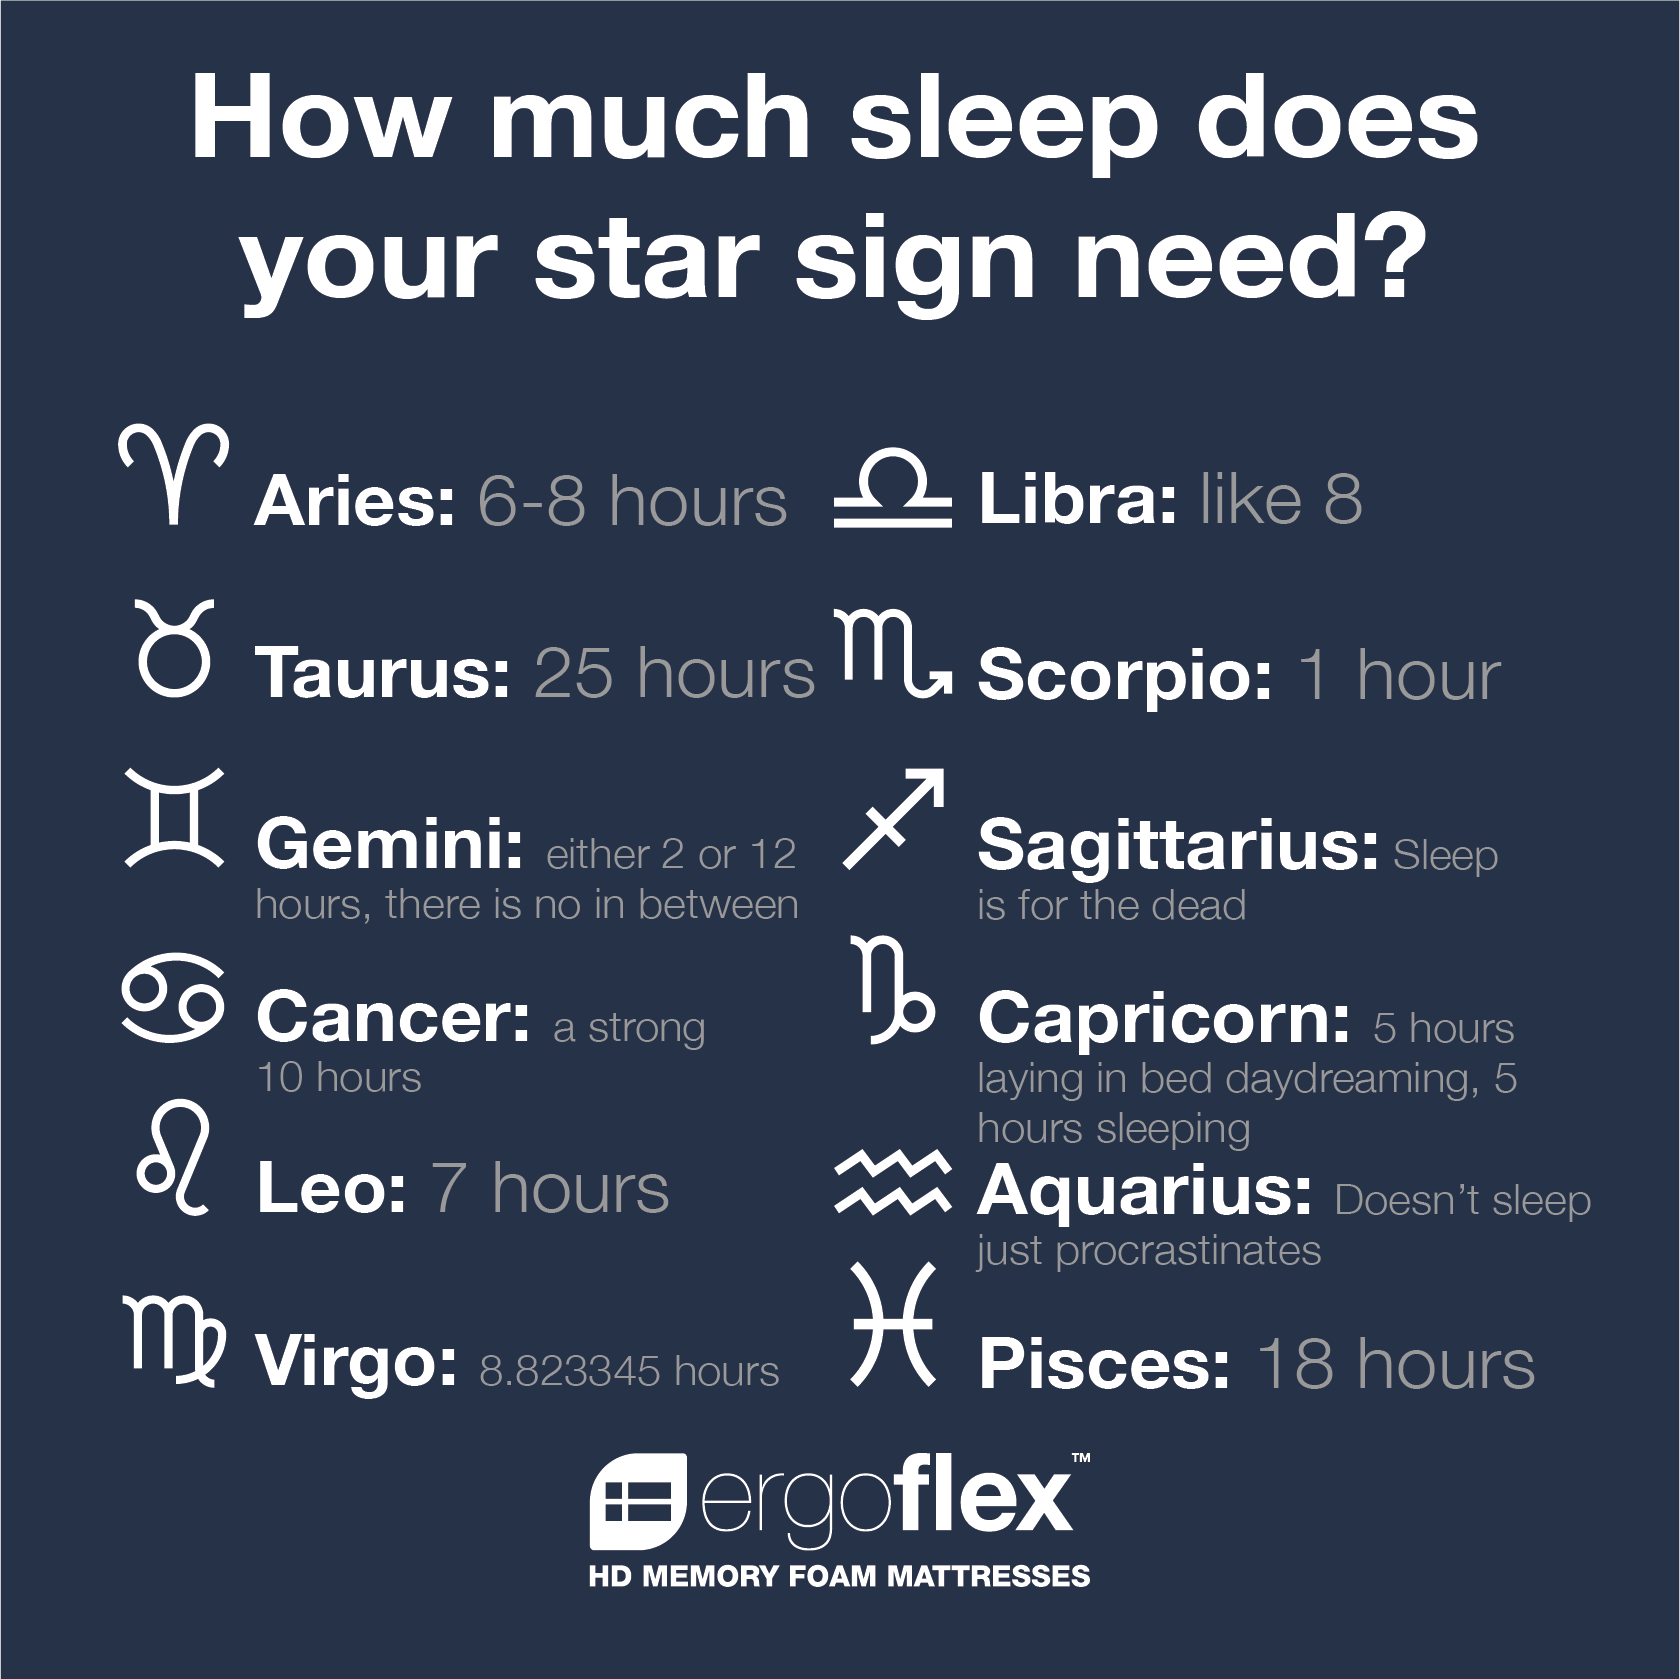 Why Are Pisces So Good In Bed